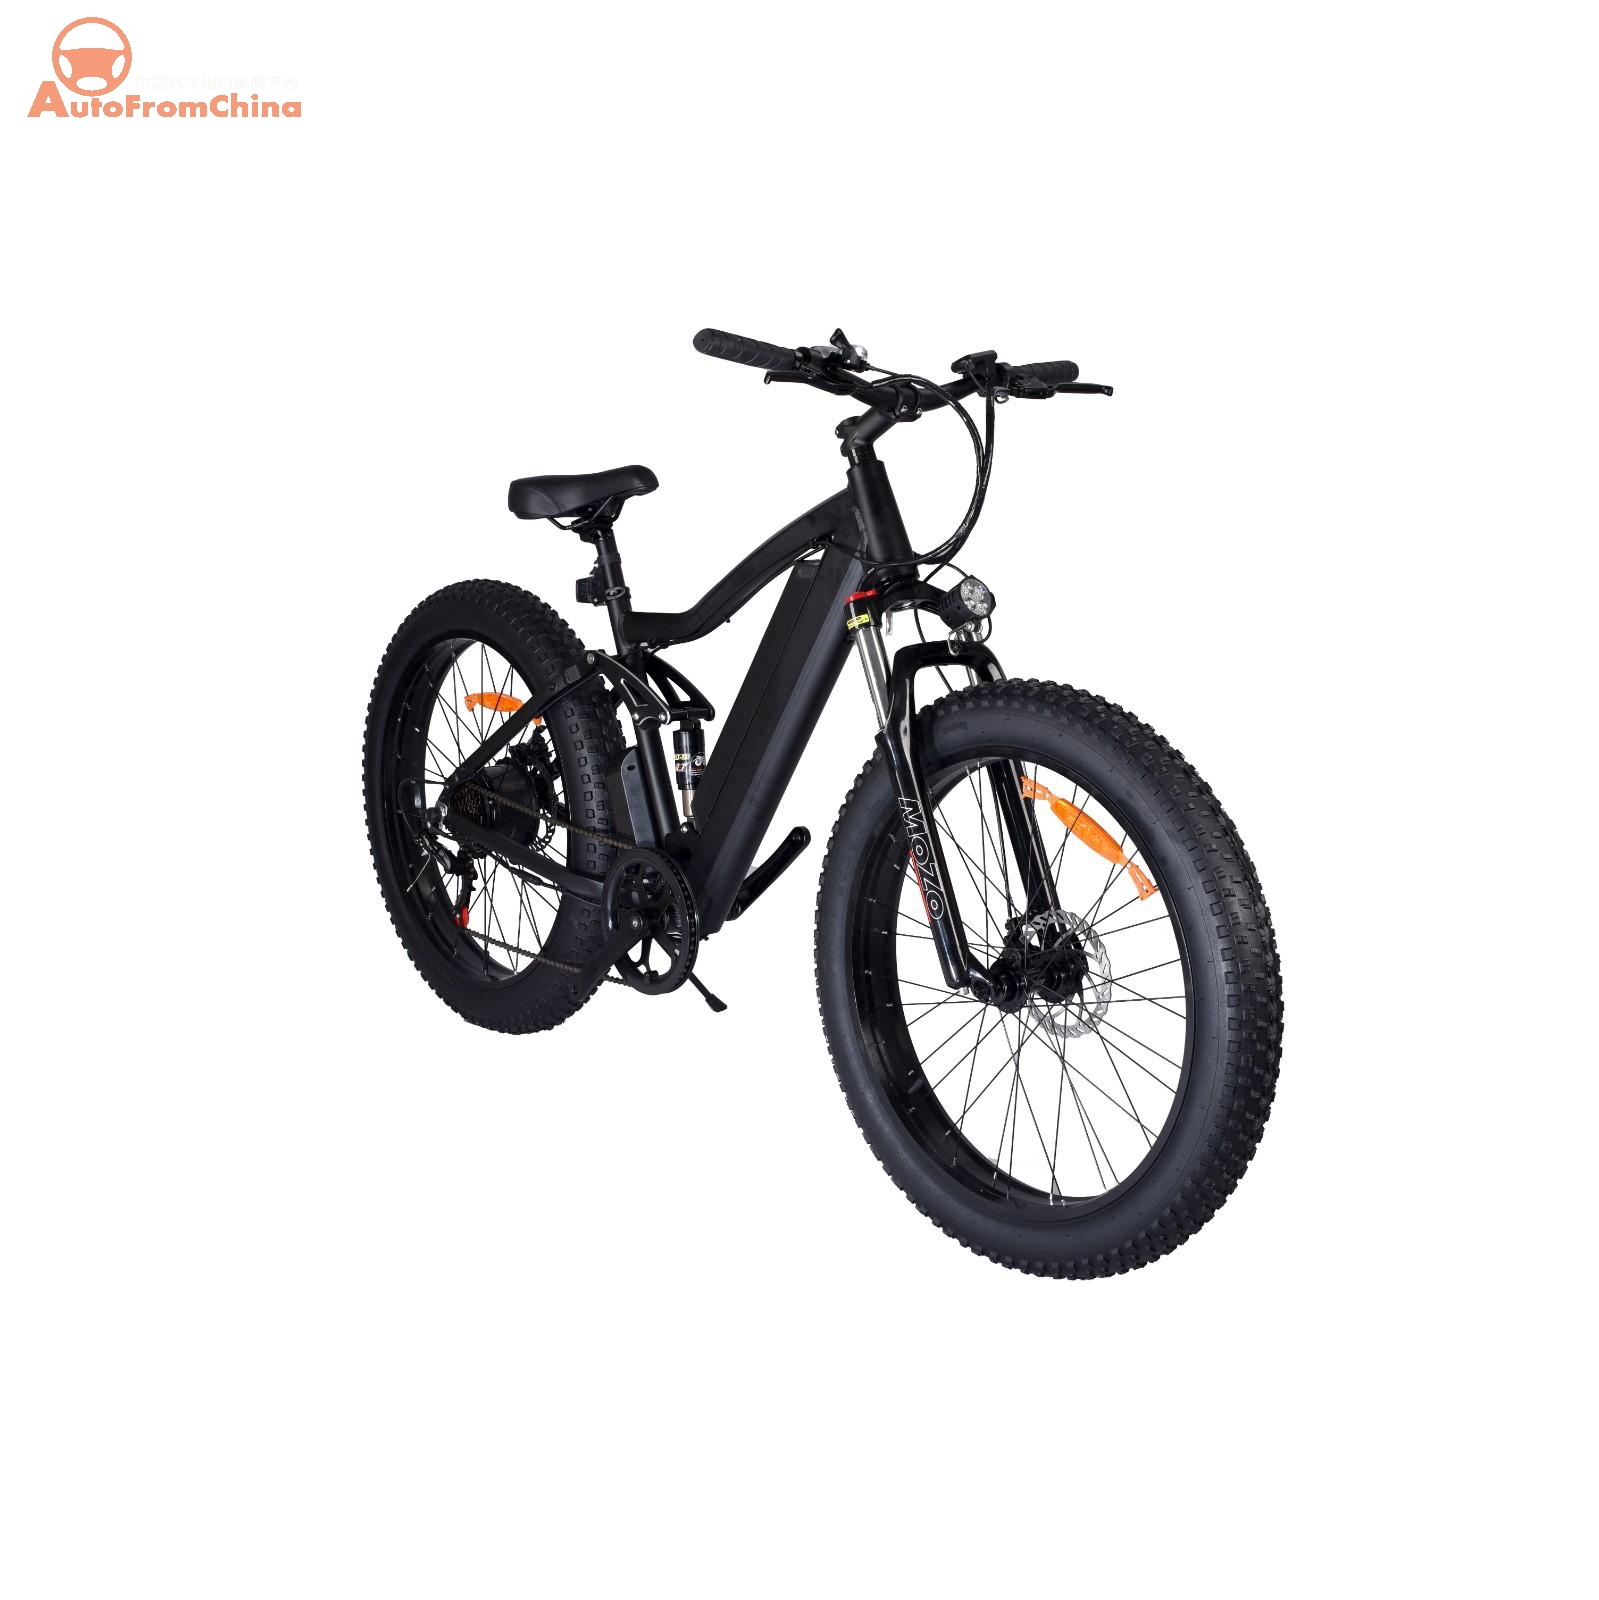 EBike026A Electric Bike Factory in China - Best Adult Electric Bicycles - EBikes China - Electric Bikes for Aadults